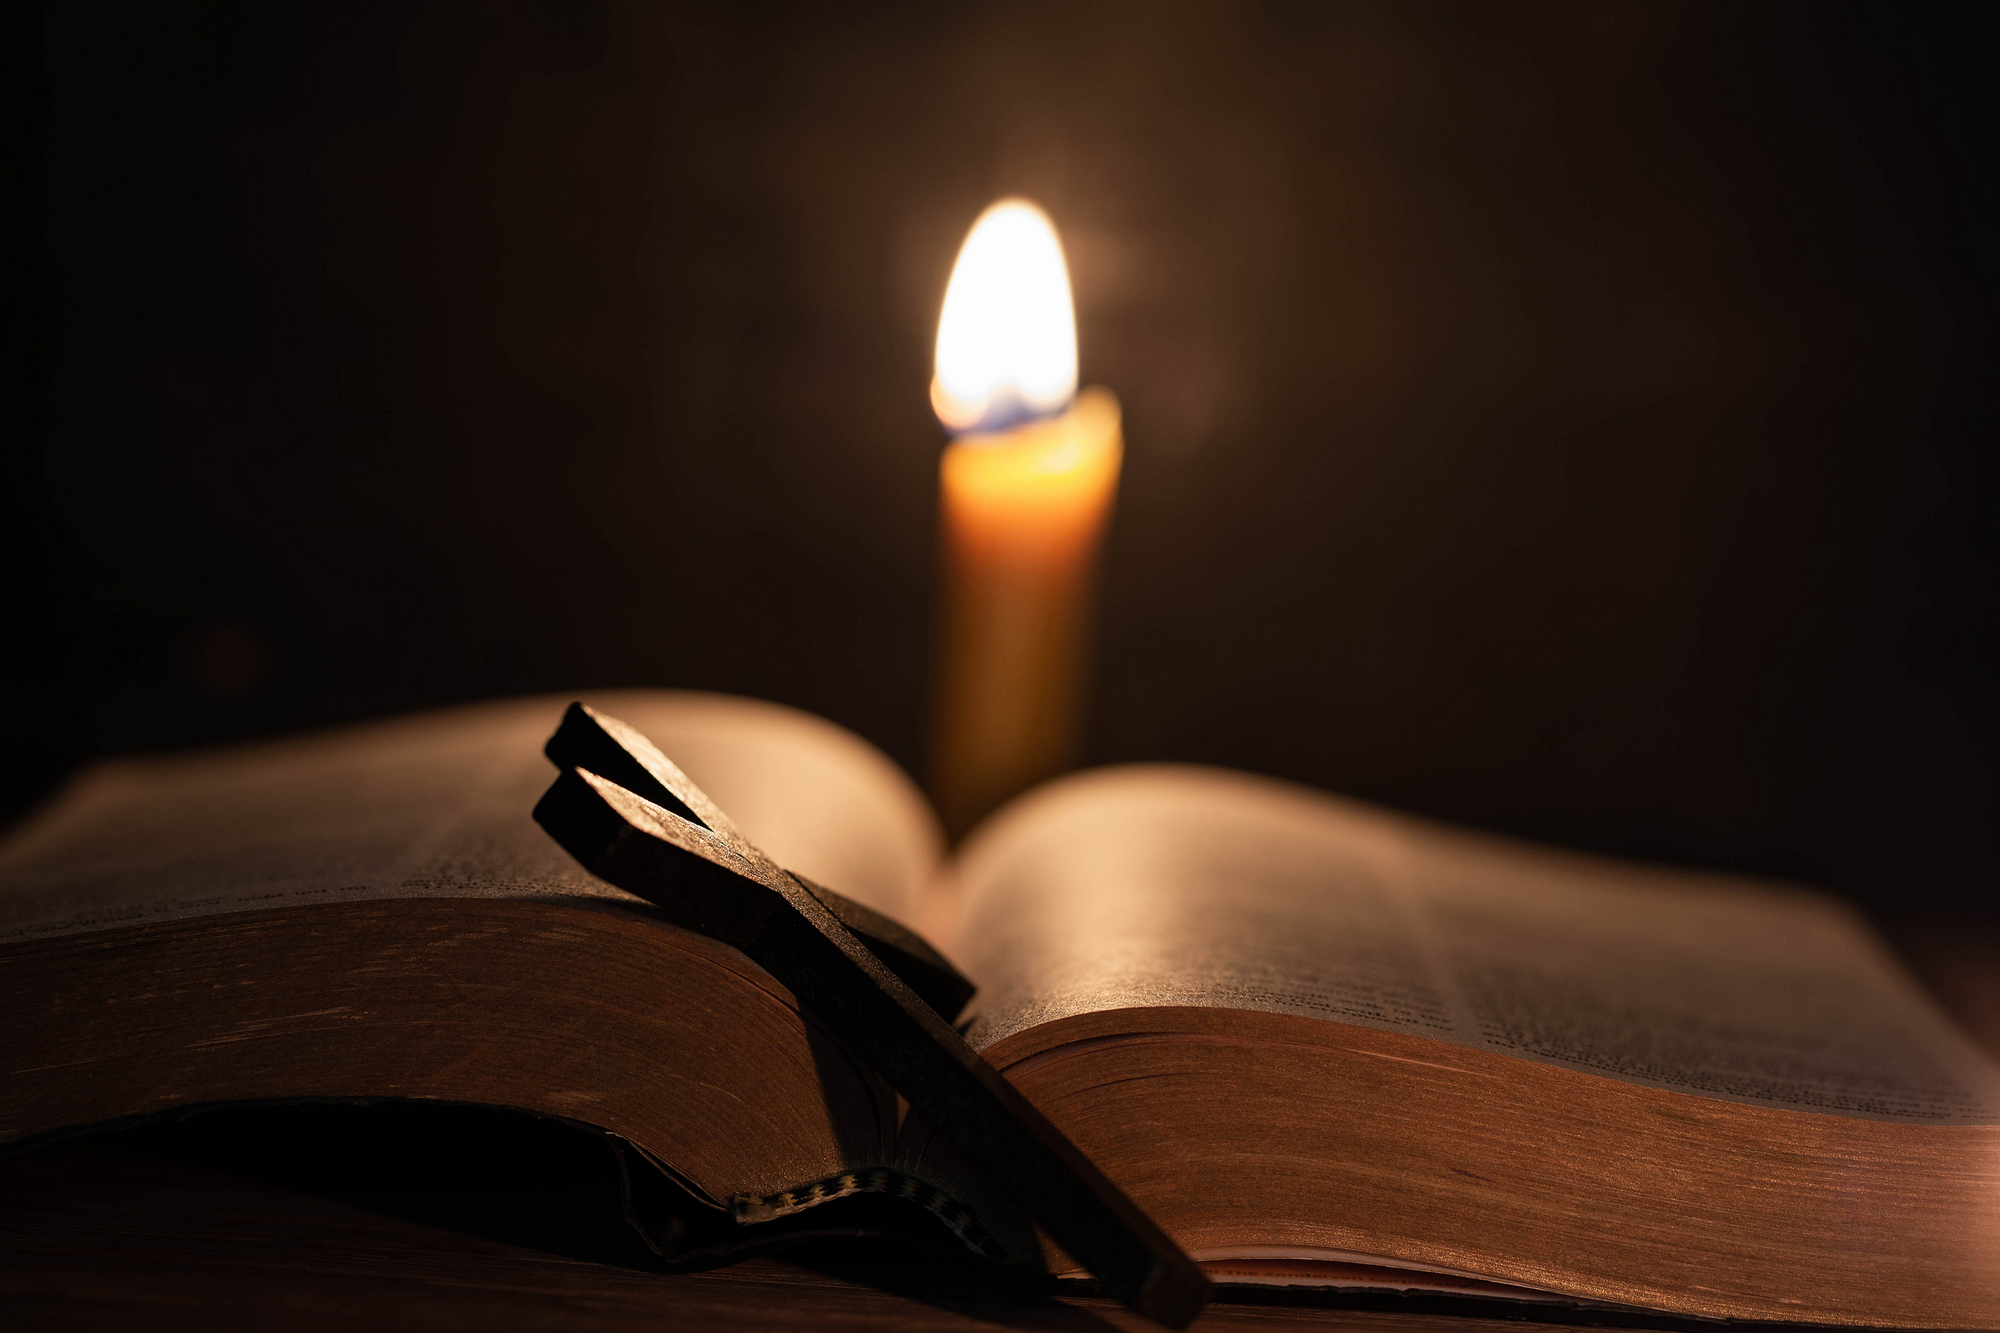 10 Christian books to look out for in 2021